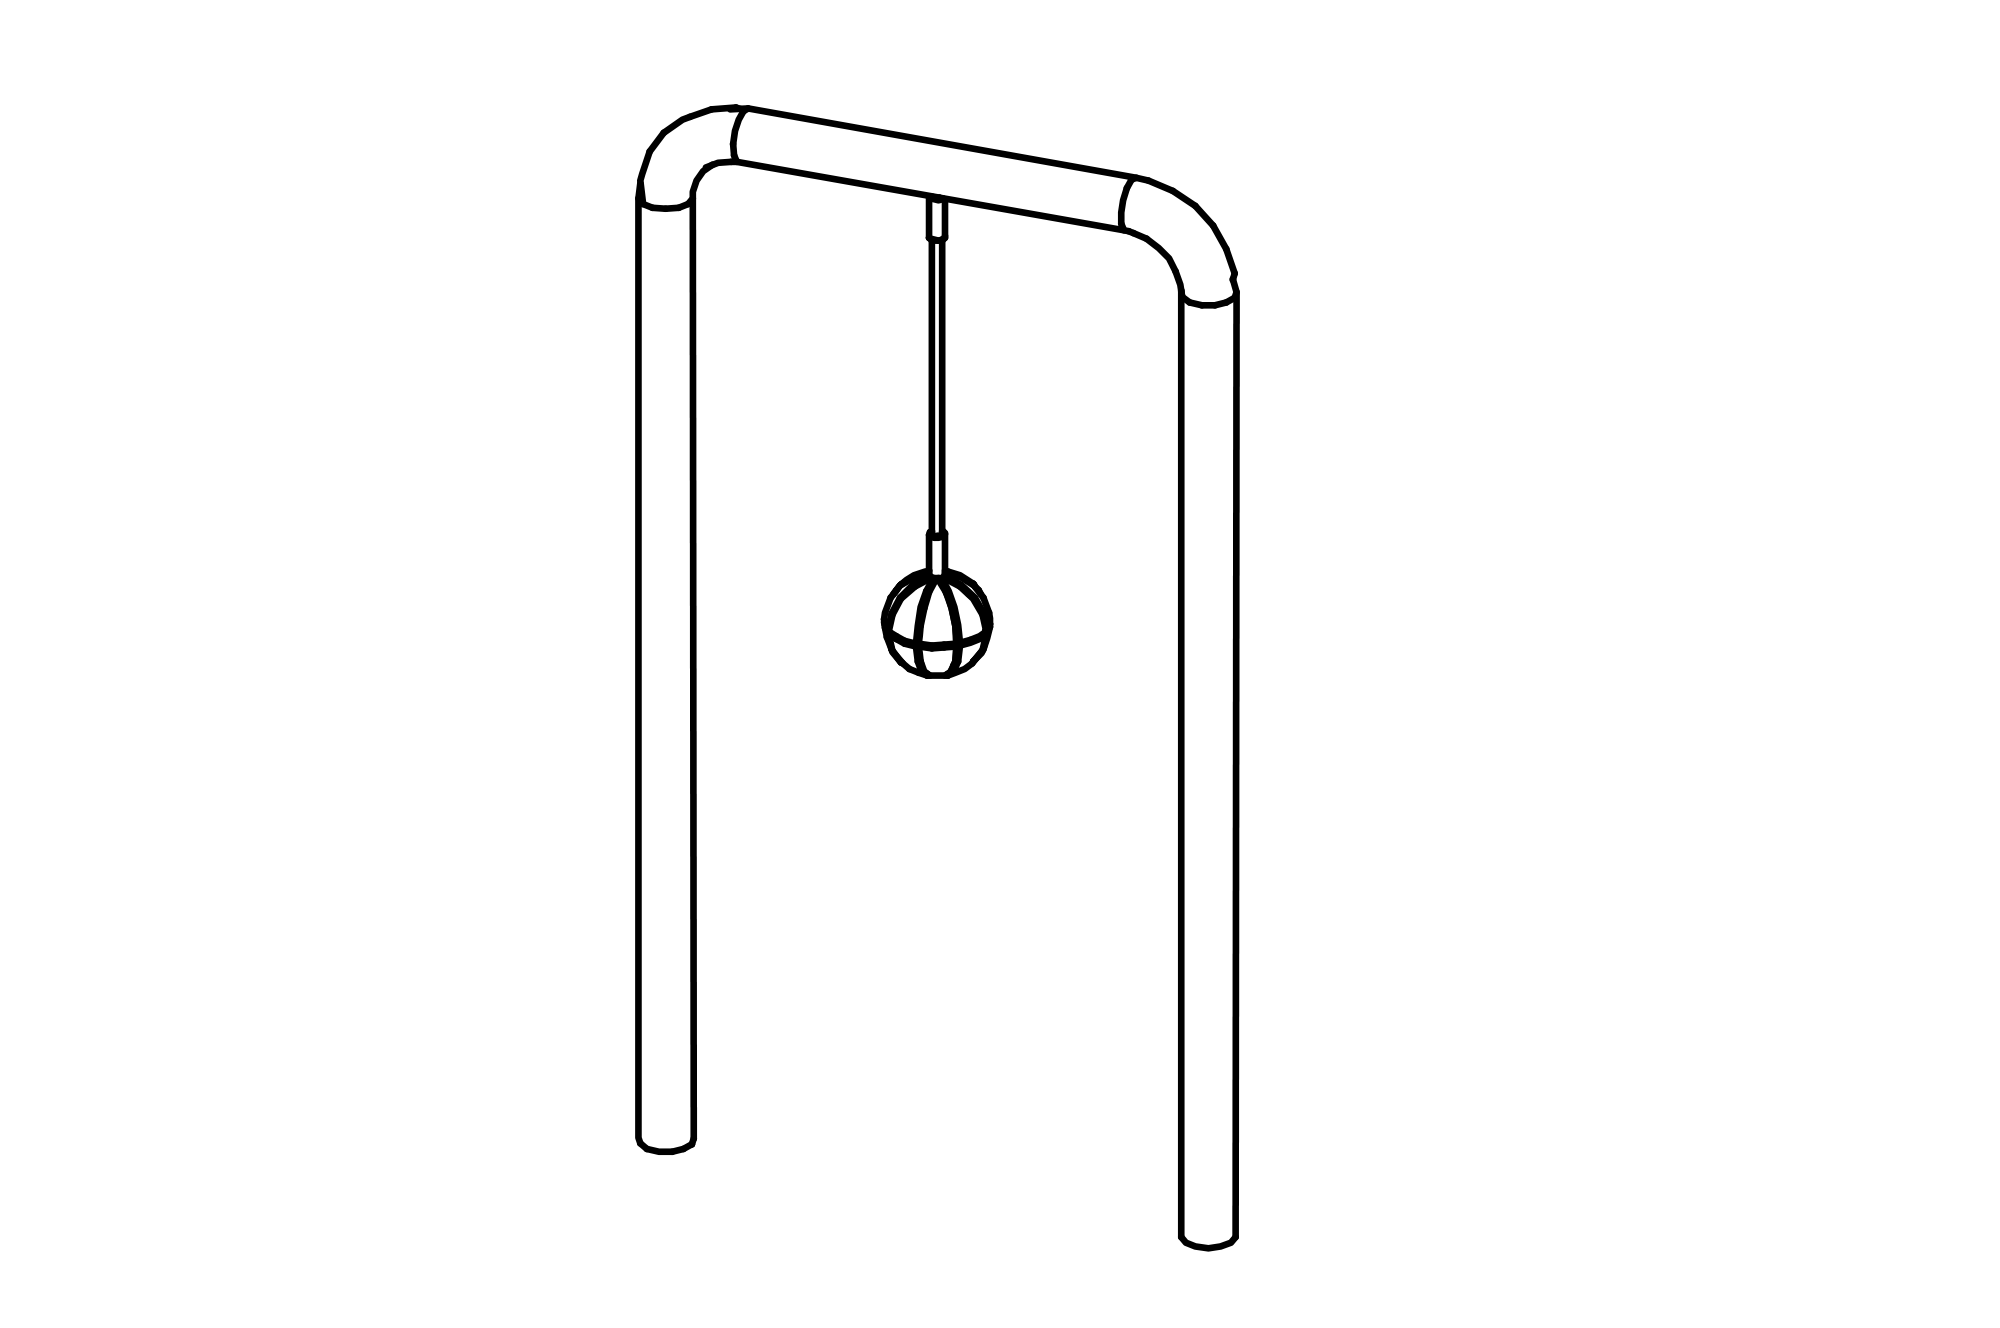 Swinging Ball with equipment made of stainless steel